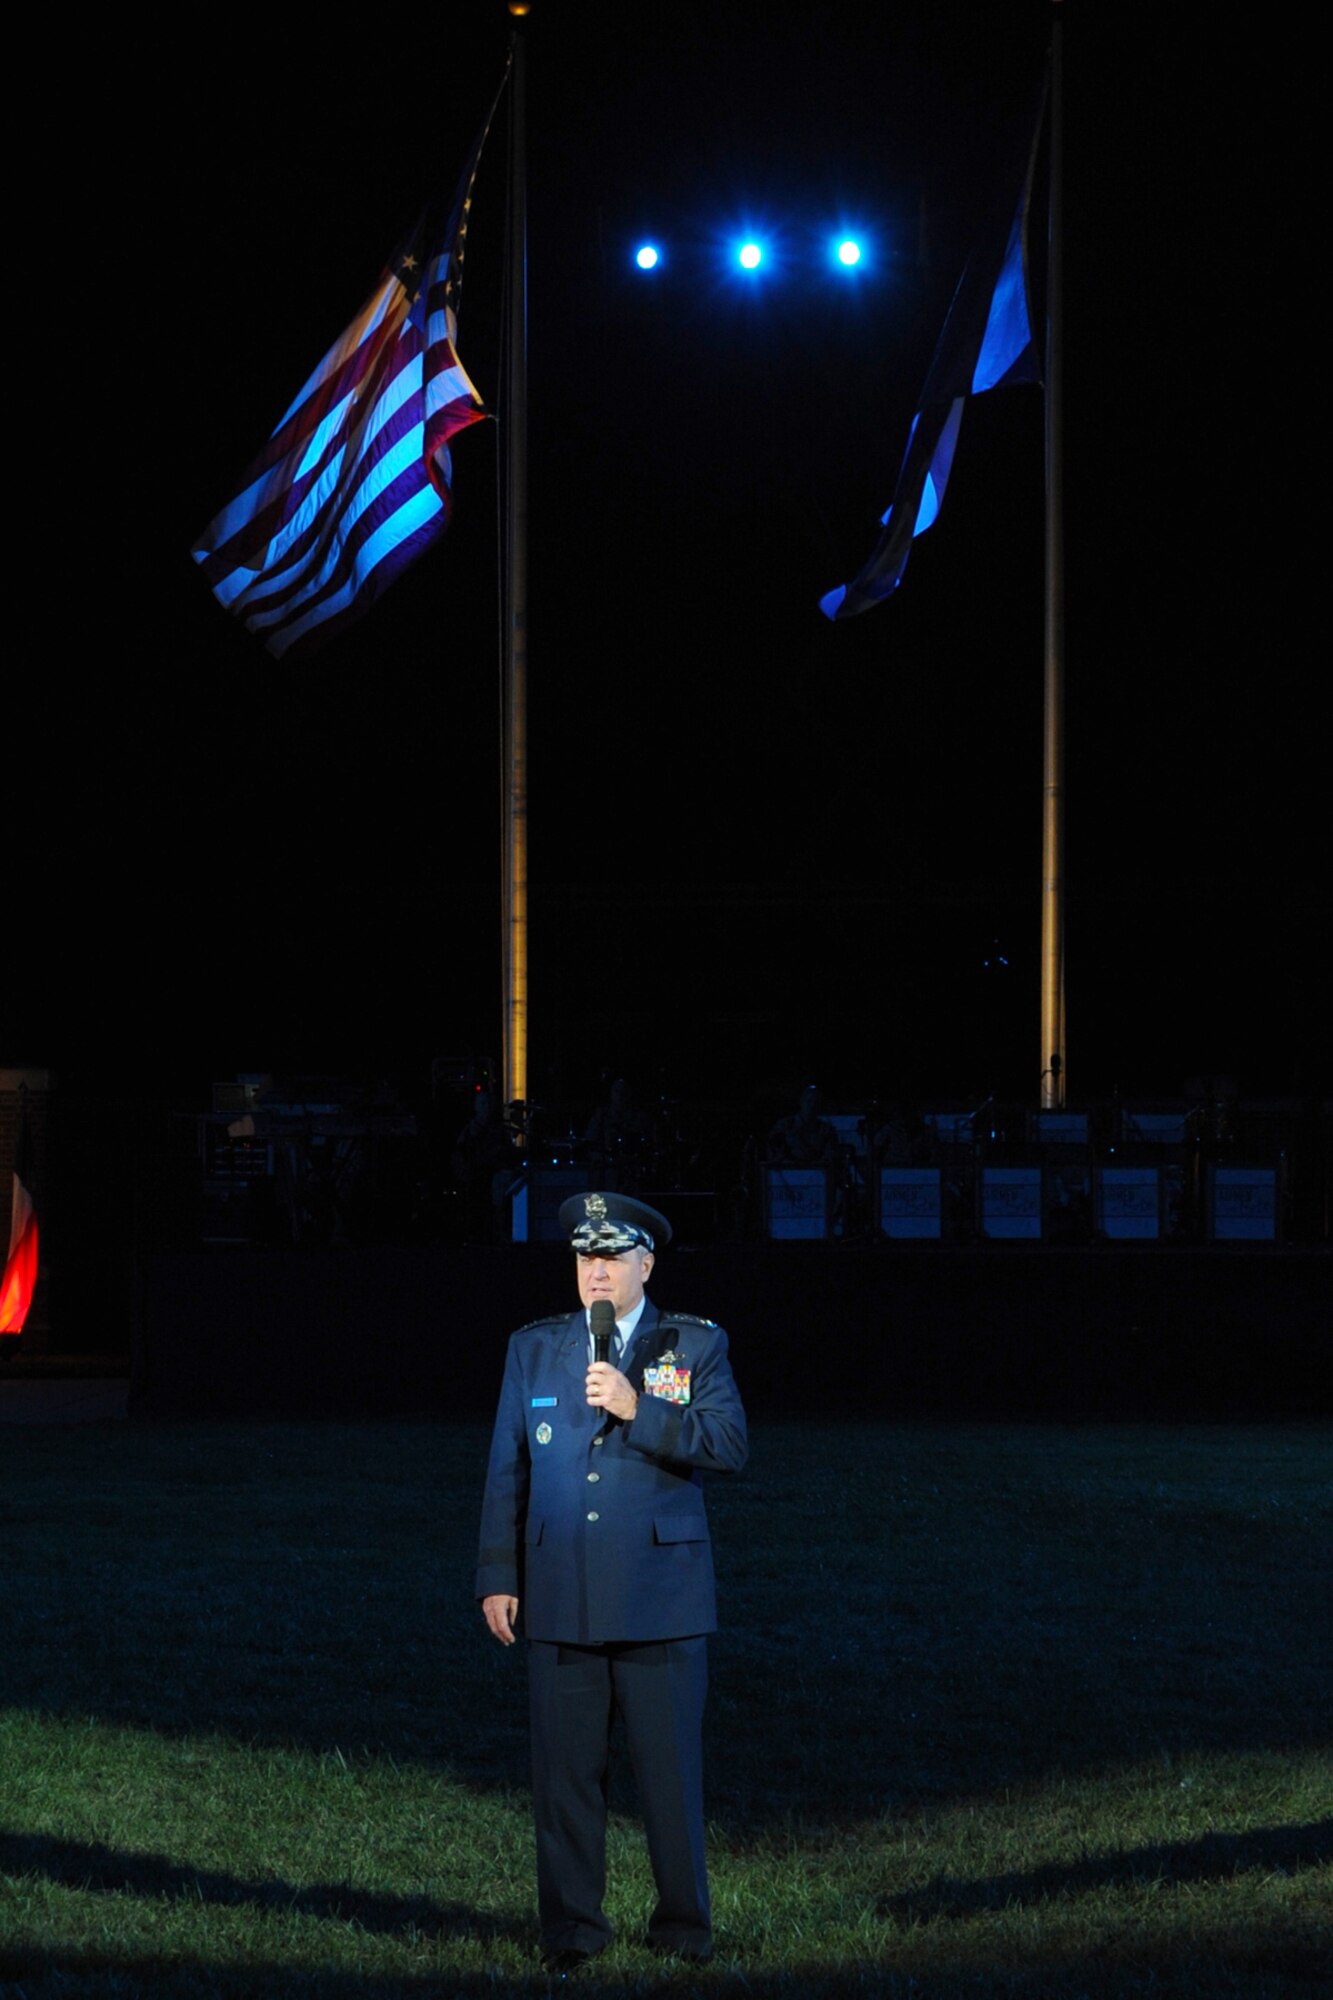 Chief of Staff of the Air Force Gen. Mark Welsh speaks to attendees during the United States Air Force Tattoo on Sept. 17, 2015. The Air Force District of Washington commemorated the United States Air Force's 68th birthday September 17, 2015 with a celebration of music, drill and ceremony, aircraft, and fireworks on the Air Force Ceremonial Lawn at Joint Base Anacostia-Bolling The event included flyovers of several aircraft that included the Air Force Thunderbirds and a Warbird vintage aircraft squadron, as well as performances by the Air Force Band and Honor Guard. (U.S. Air Force photo/Staff Sgt. Matt Davis)